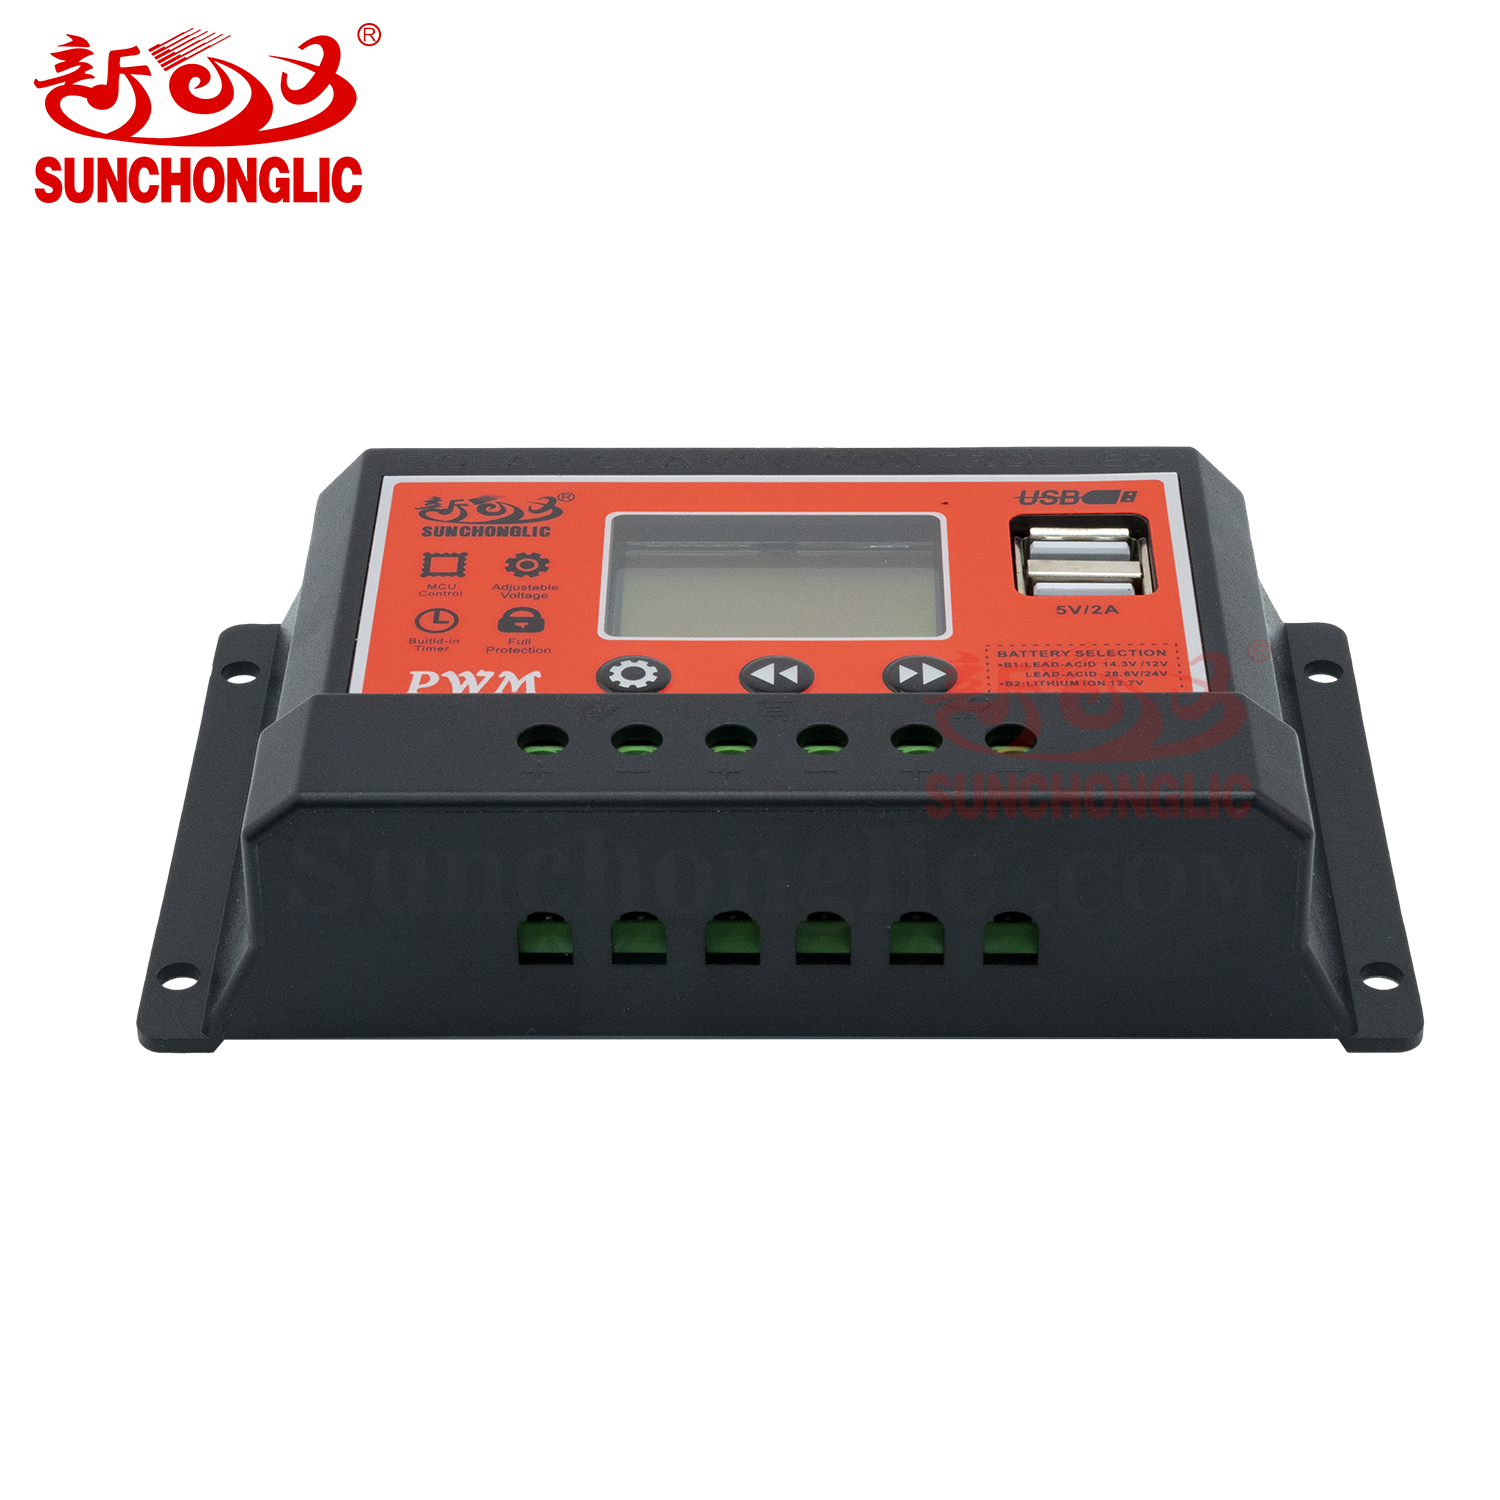 PWM Solar Charge Controller - FT-D1210